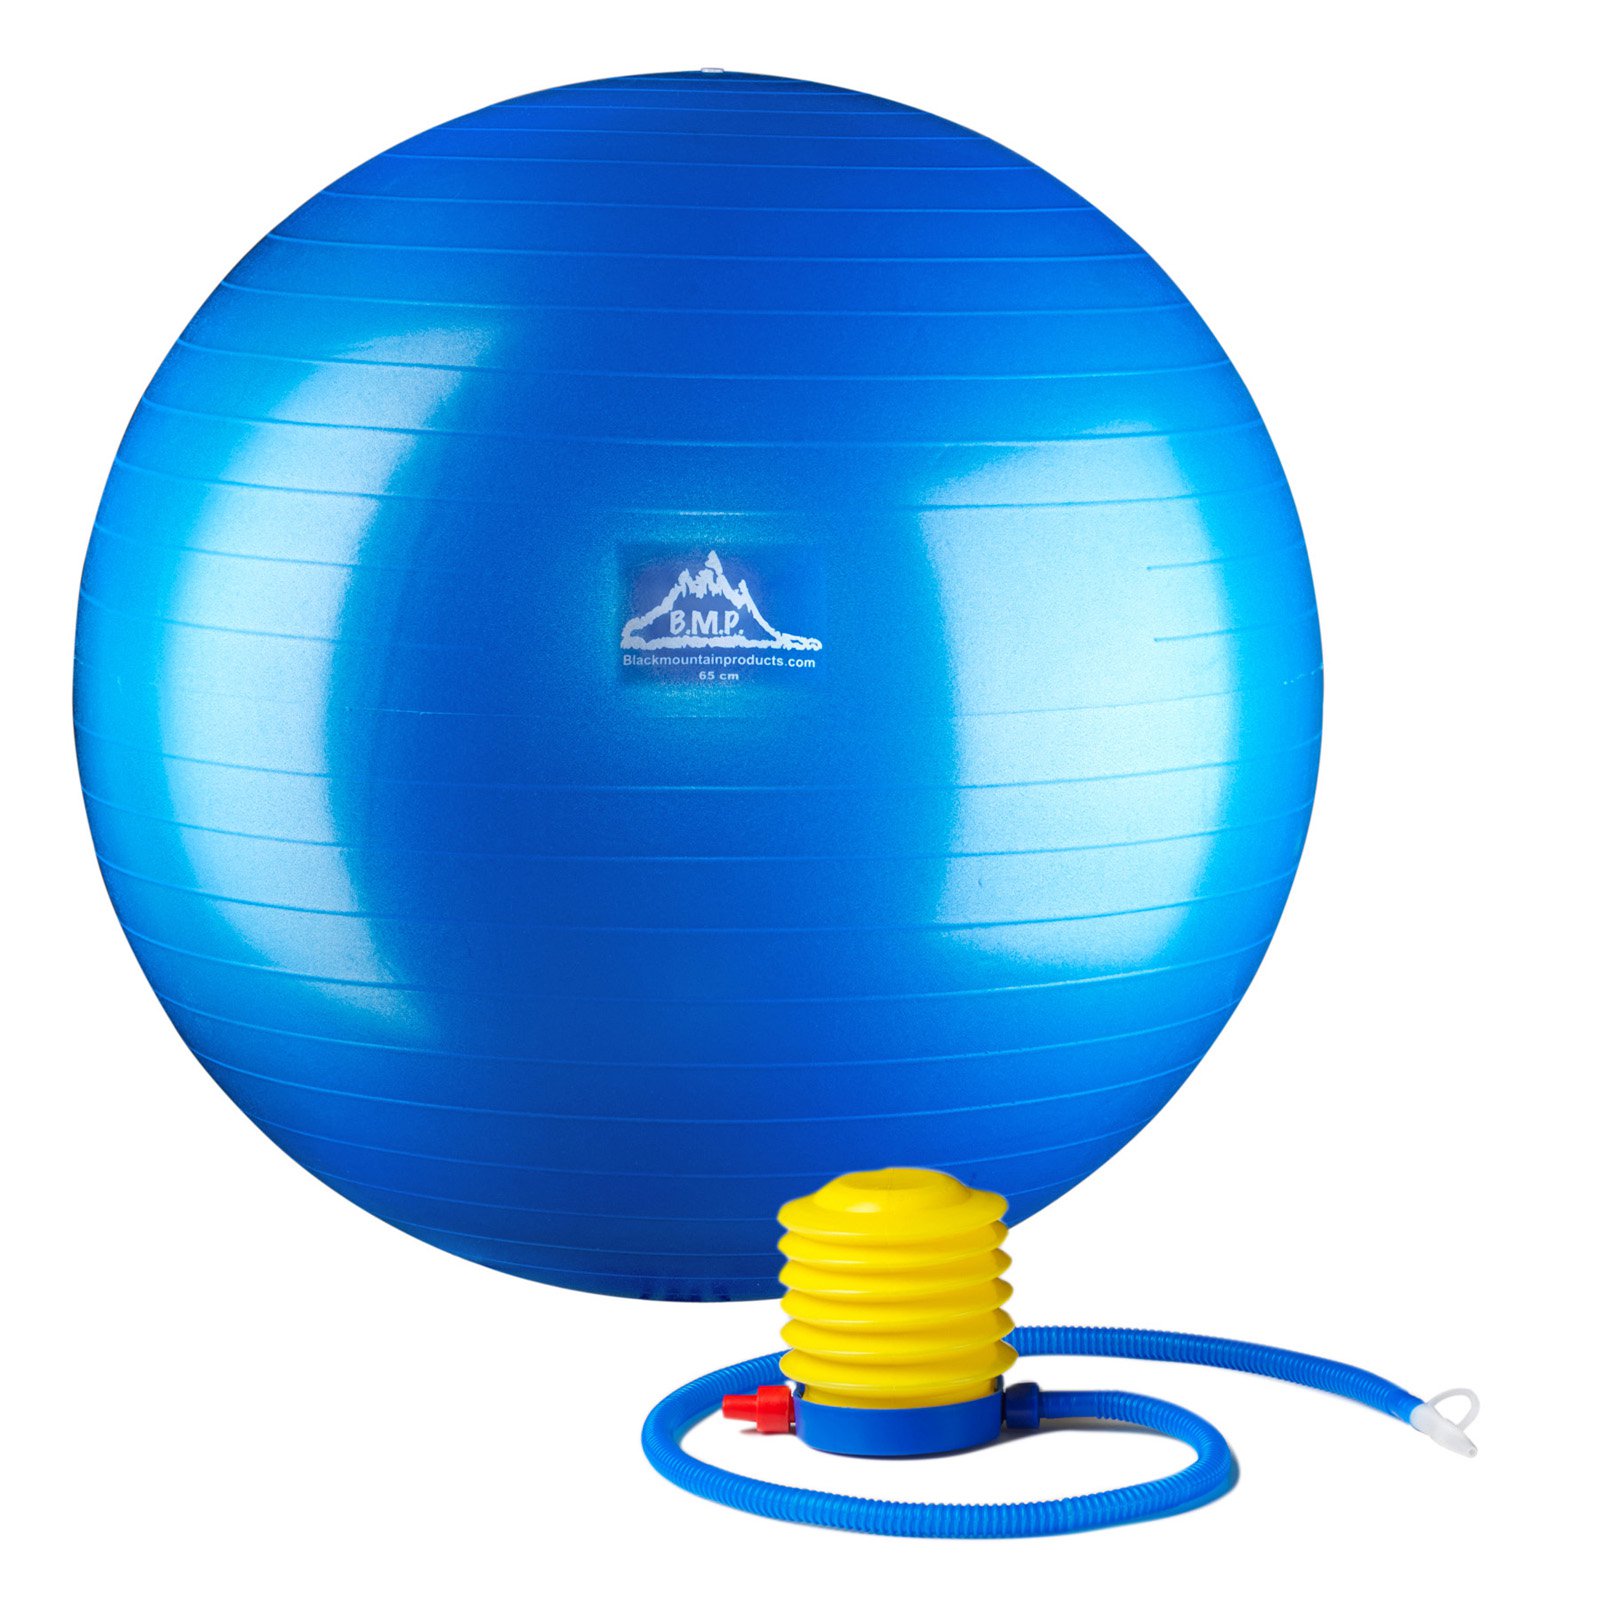 Black Mountain Products Professional Grade Stability Ball - Pro Series 1000 Lbs. Anti-burst 2000 Lbs. Static Weight Capacity, 55 cm Blue - image 1 of 5